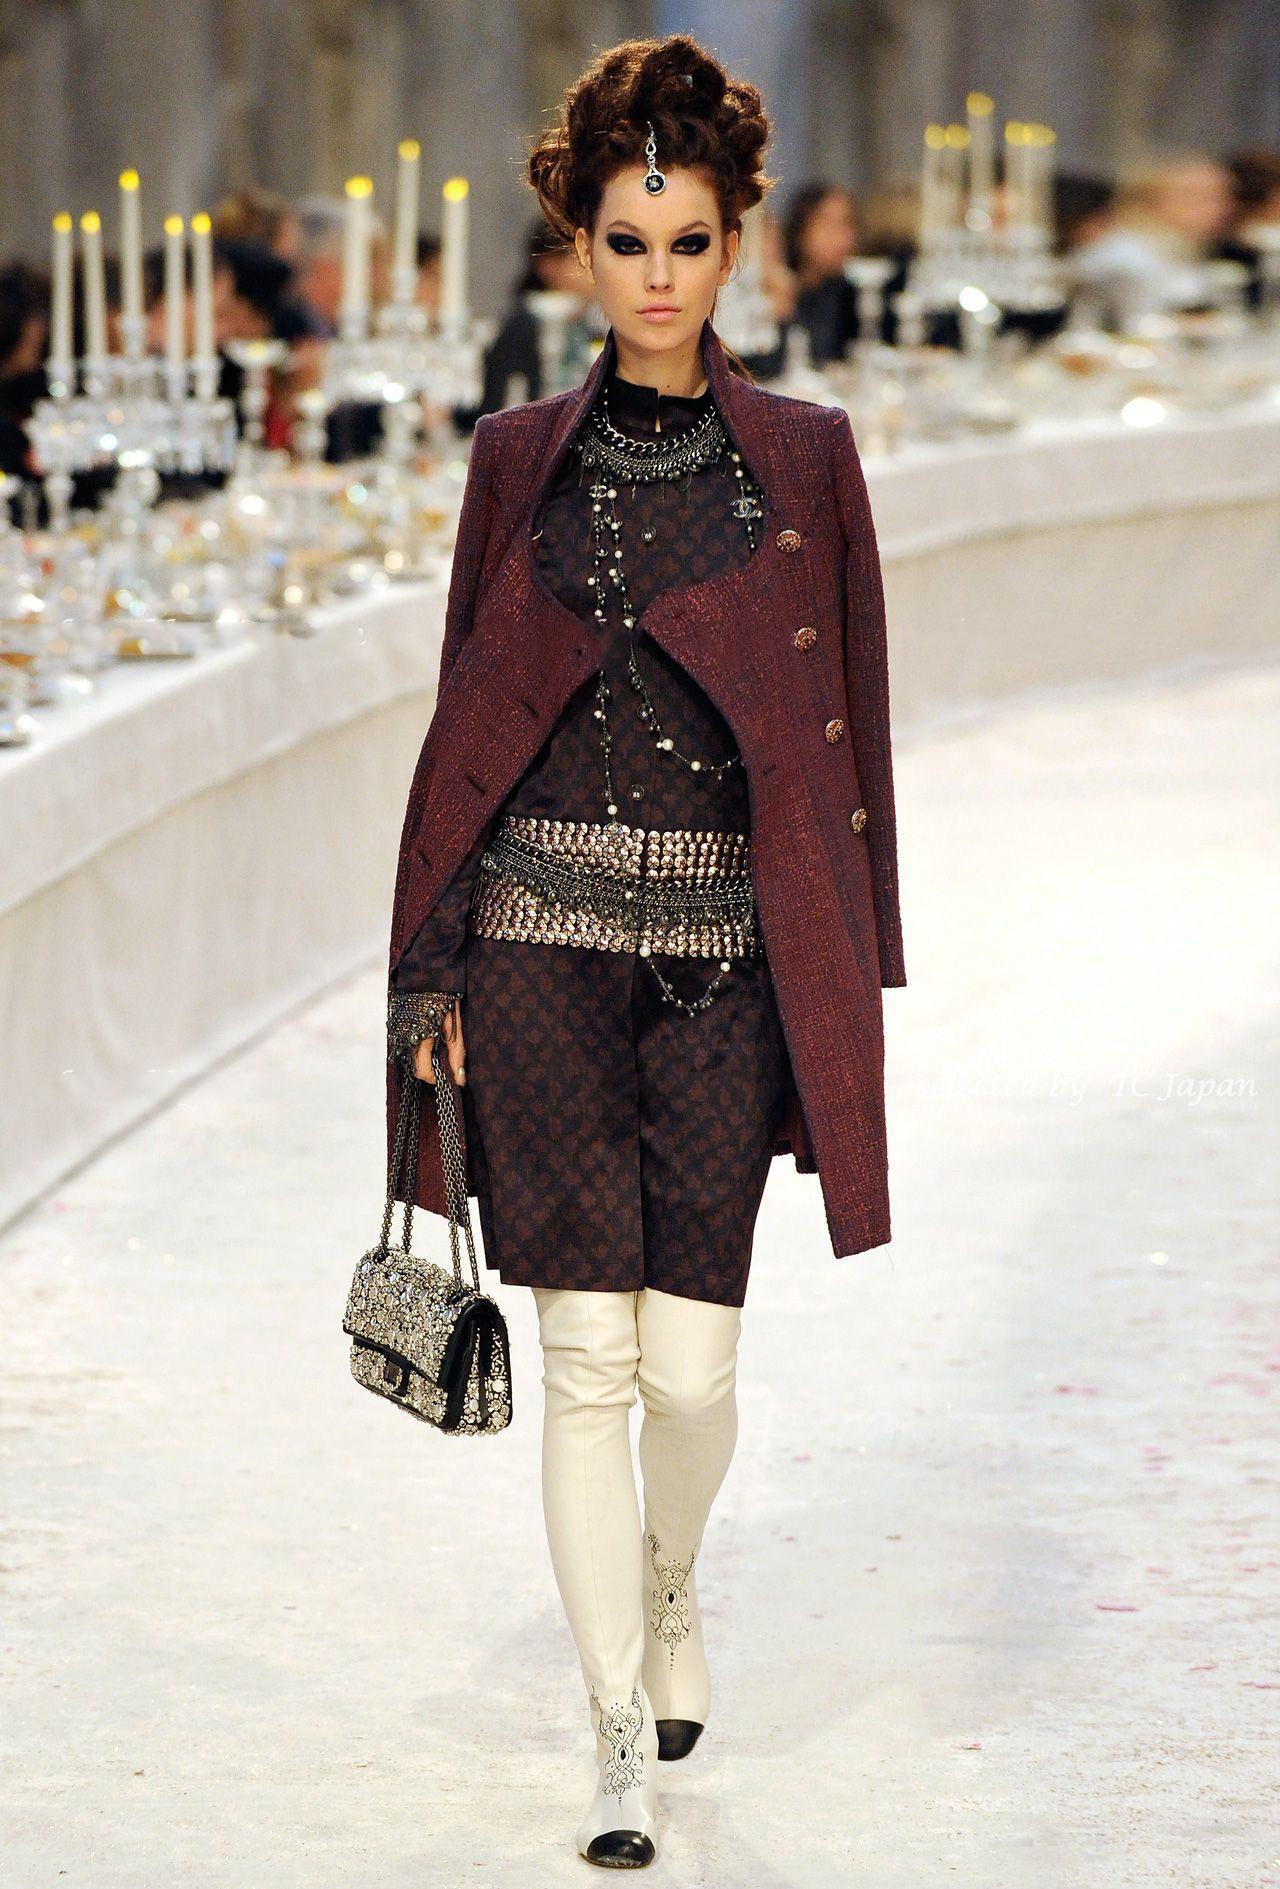 Absolutely stunning Chanel tweed coat featuring 20! jewel buttons -
from Metiers d'Art ''Paris - Bombay'' Collection. as seen on Catwalk Look # 38. Retail price was over 11,000 US$. Size mark 48 FR